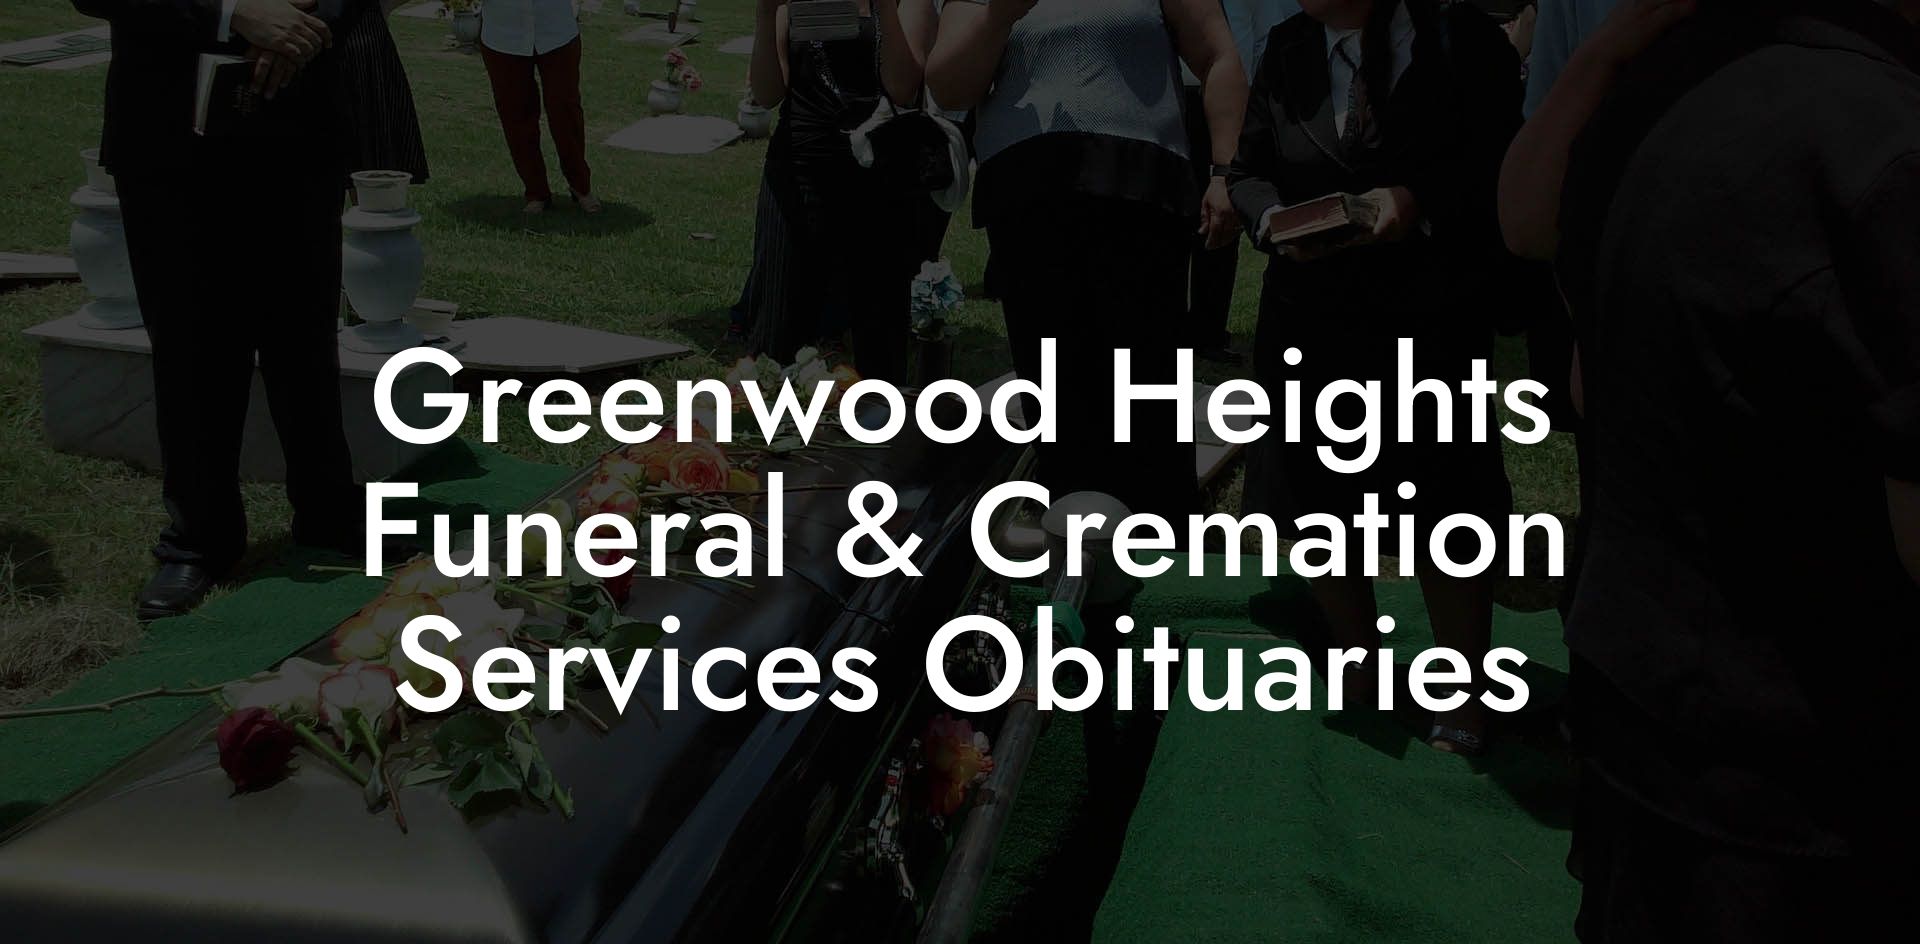 Greenwood Heights Funeral & Cremation Services Obituaries